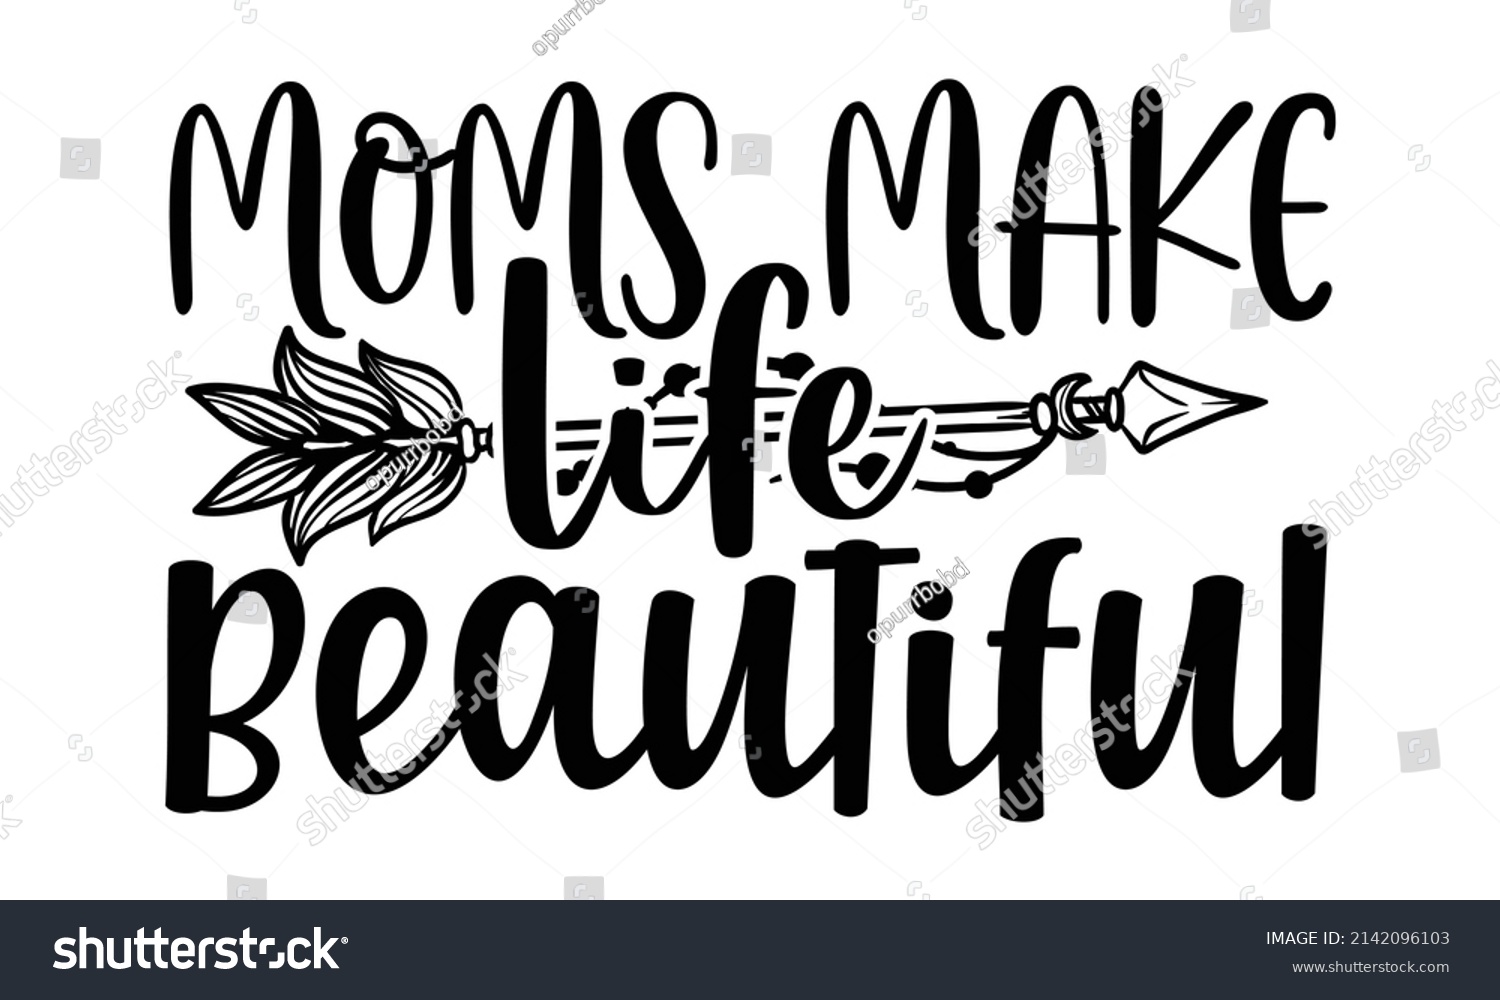 SVG of Moms make life beautiful- Mother's day t-shirt design, Hand drawn lettering phrase, Calligraphy t-shirt design, Isolated on white background, Handwritten vector sign, SVG, EPS 10 svg